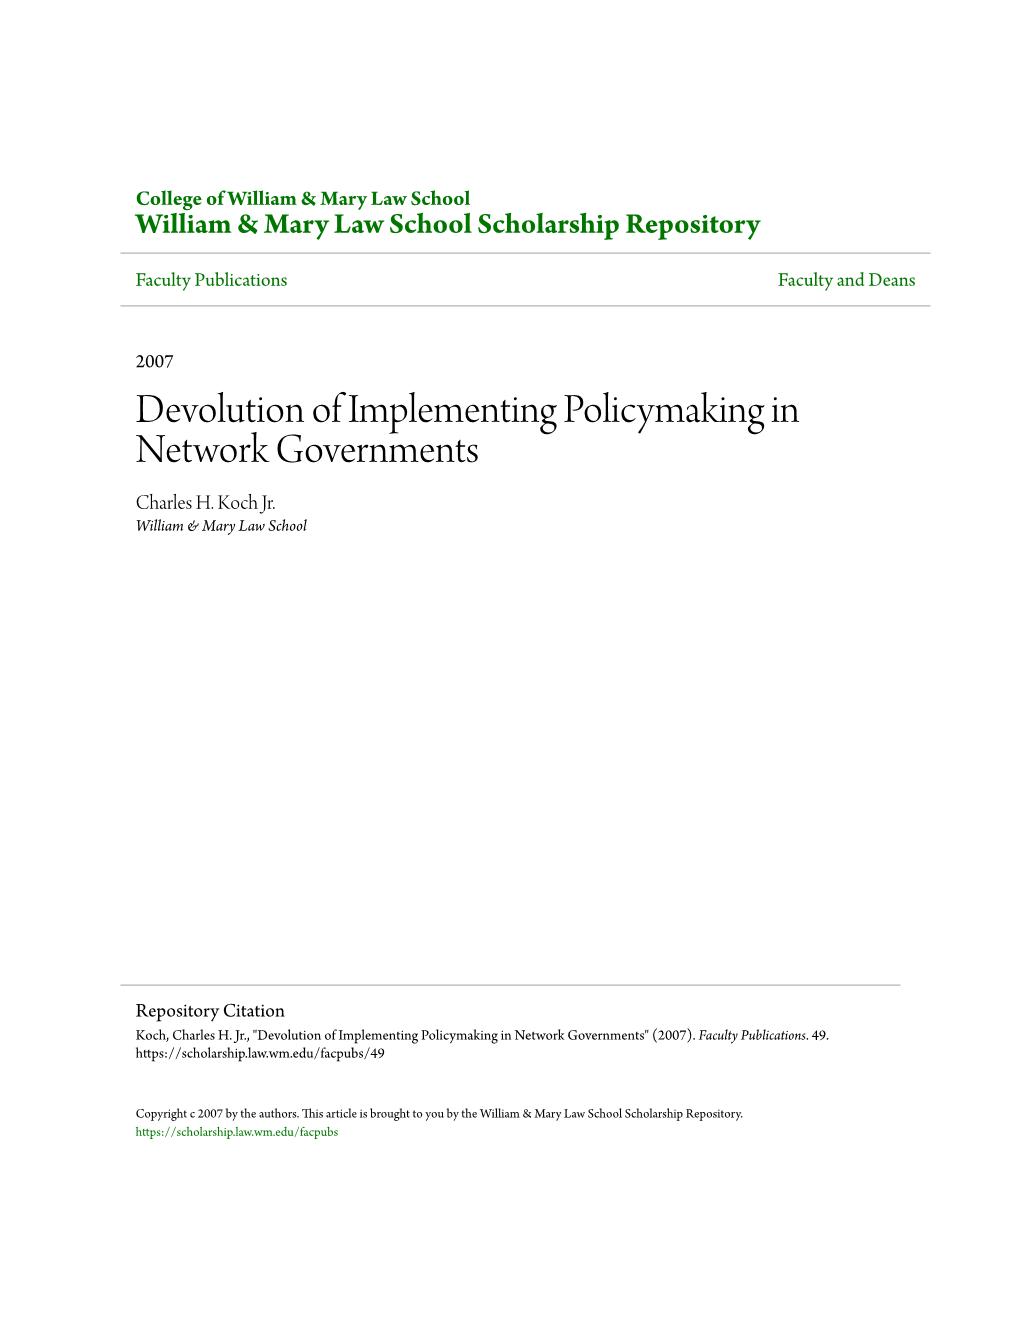 Devolution of Implementing Policymaking in Network Governments Charles H